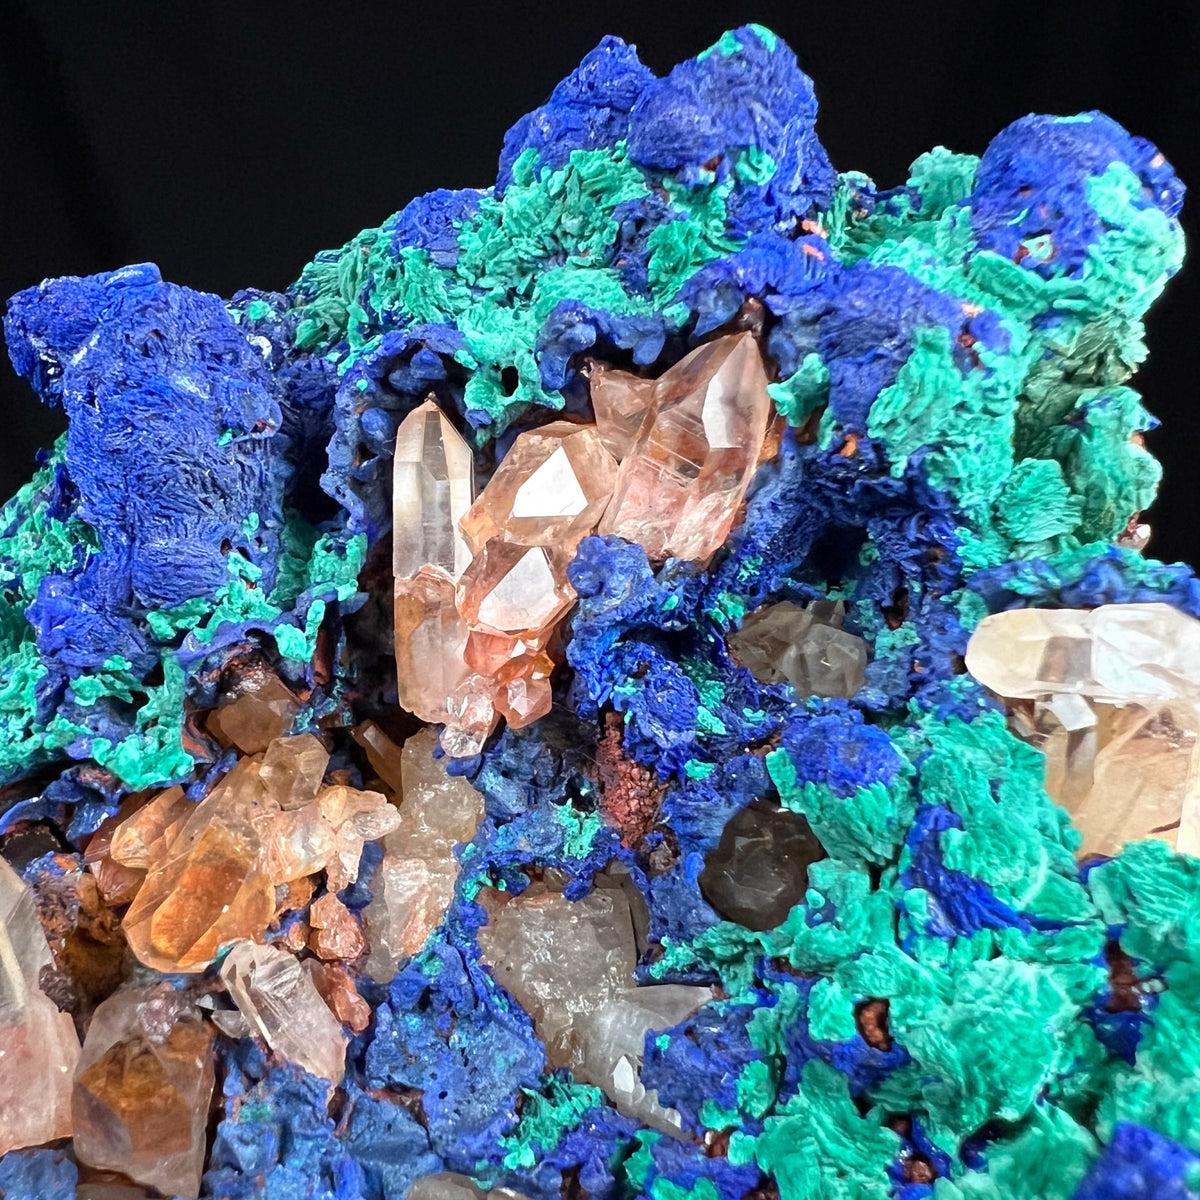 Close Up of Quartz Crystals Coated by Azurite and Malachite Mineralization